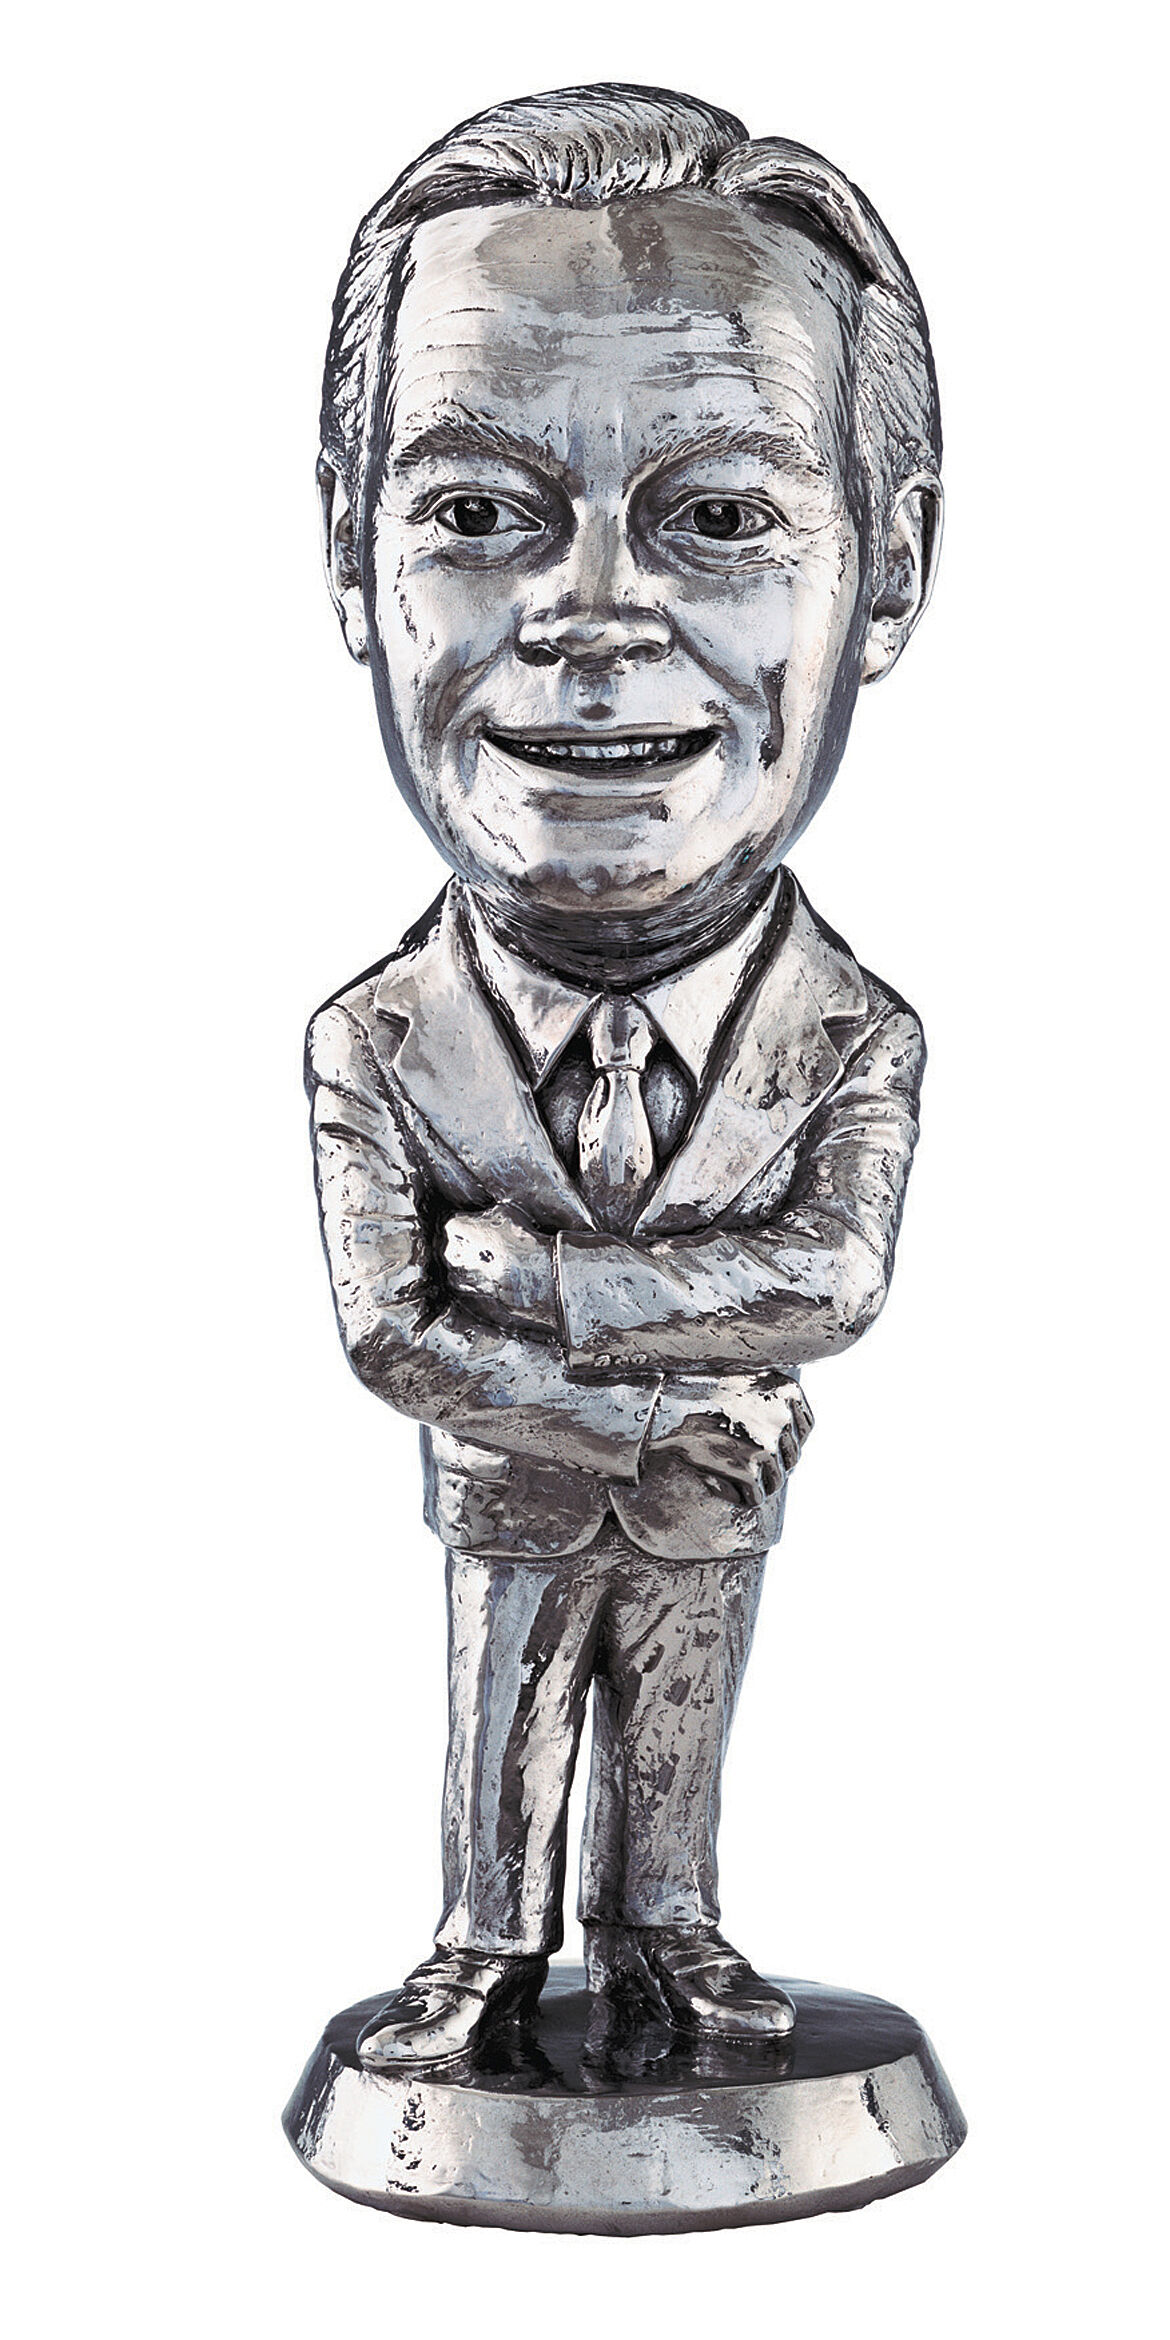 Metal caricature statue of a smiling man in a suit with crossed arms.